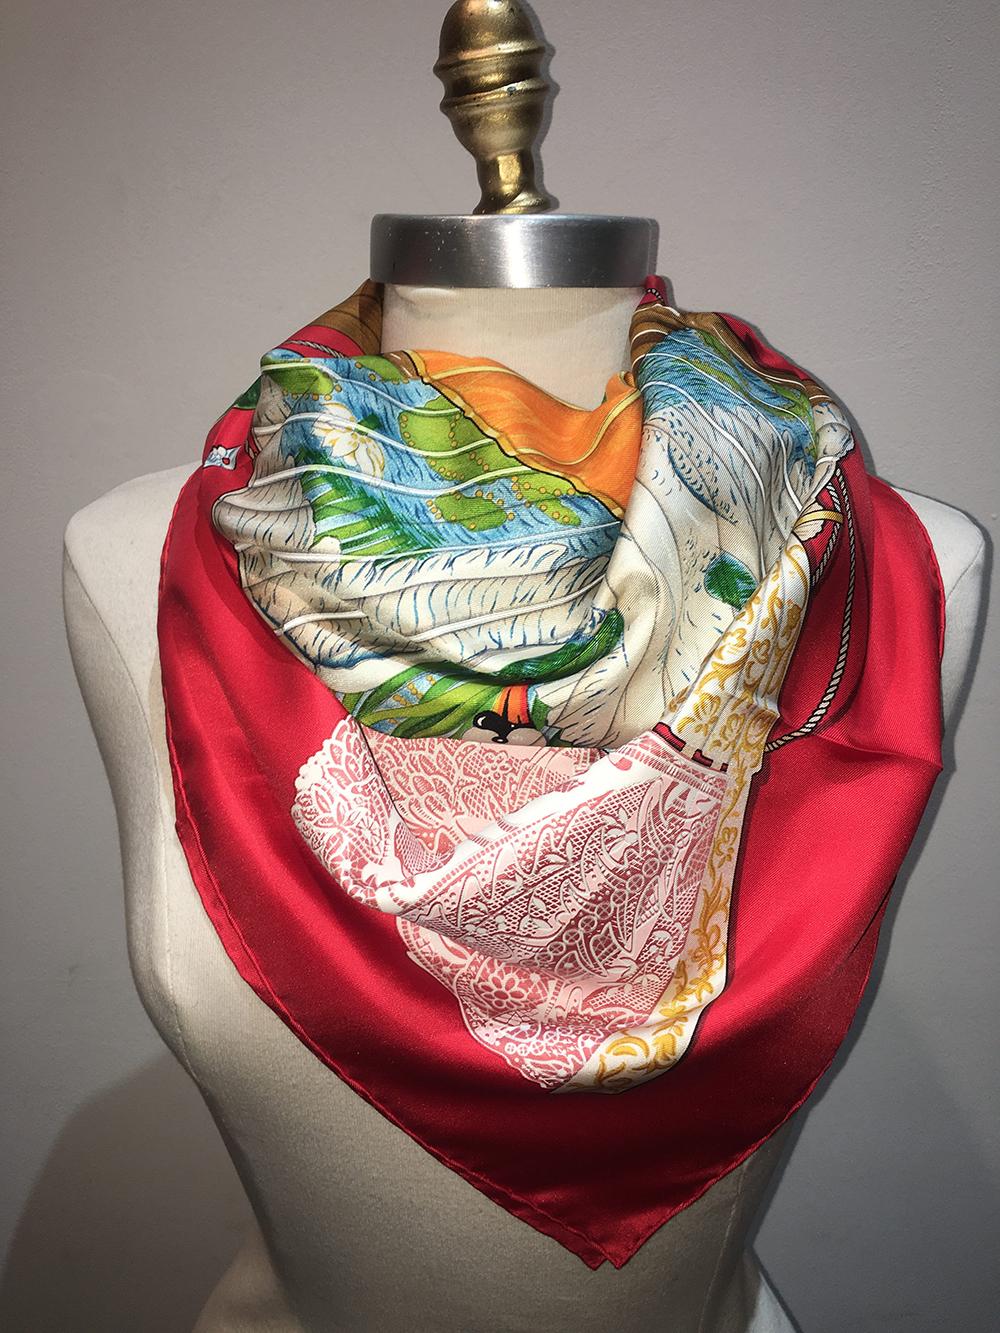 GORGEOUS Hermes Vintage Brise de charme silk scarf in excellent condition. Original silk screen design c1991 by Julia Abadie features an assortment of antique fans in lace, peacock, and horse prints over a bright red background. 100% silk, hand